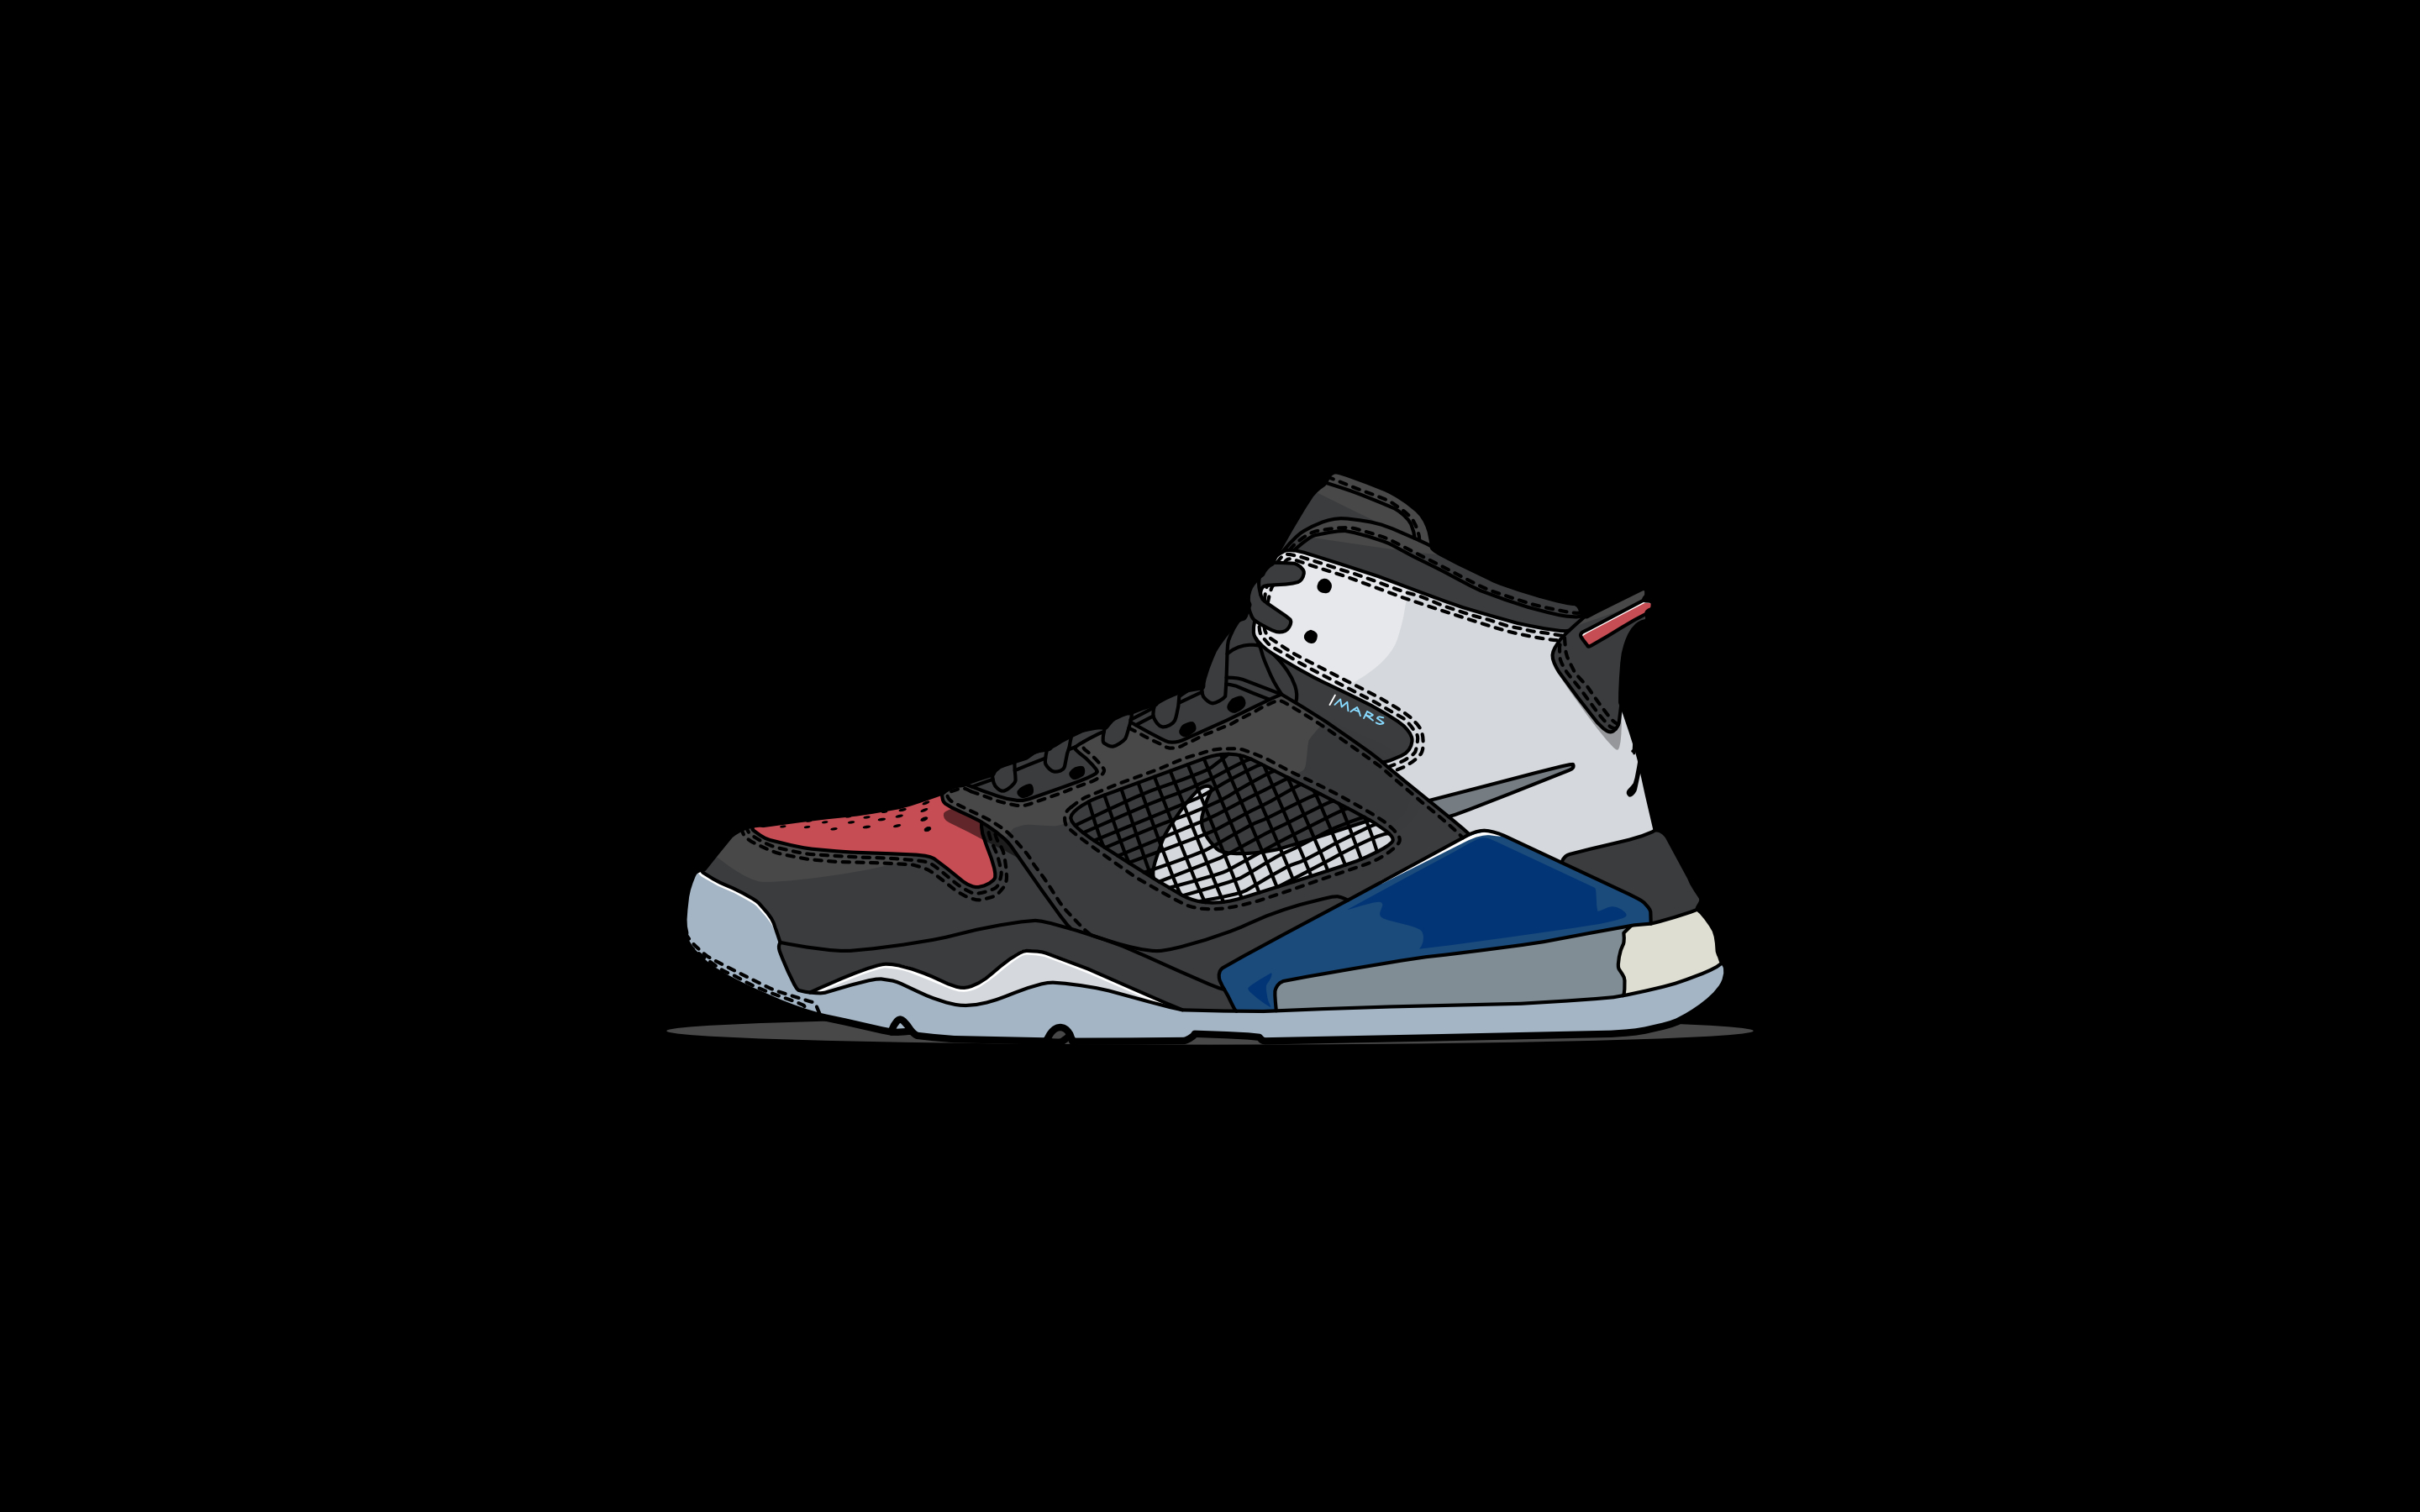 General 2880x1800 sneakers illustration black background simple background